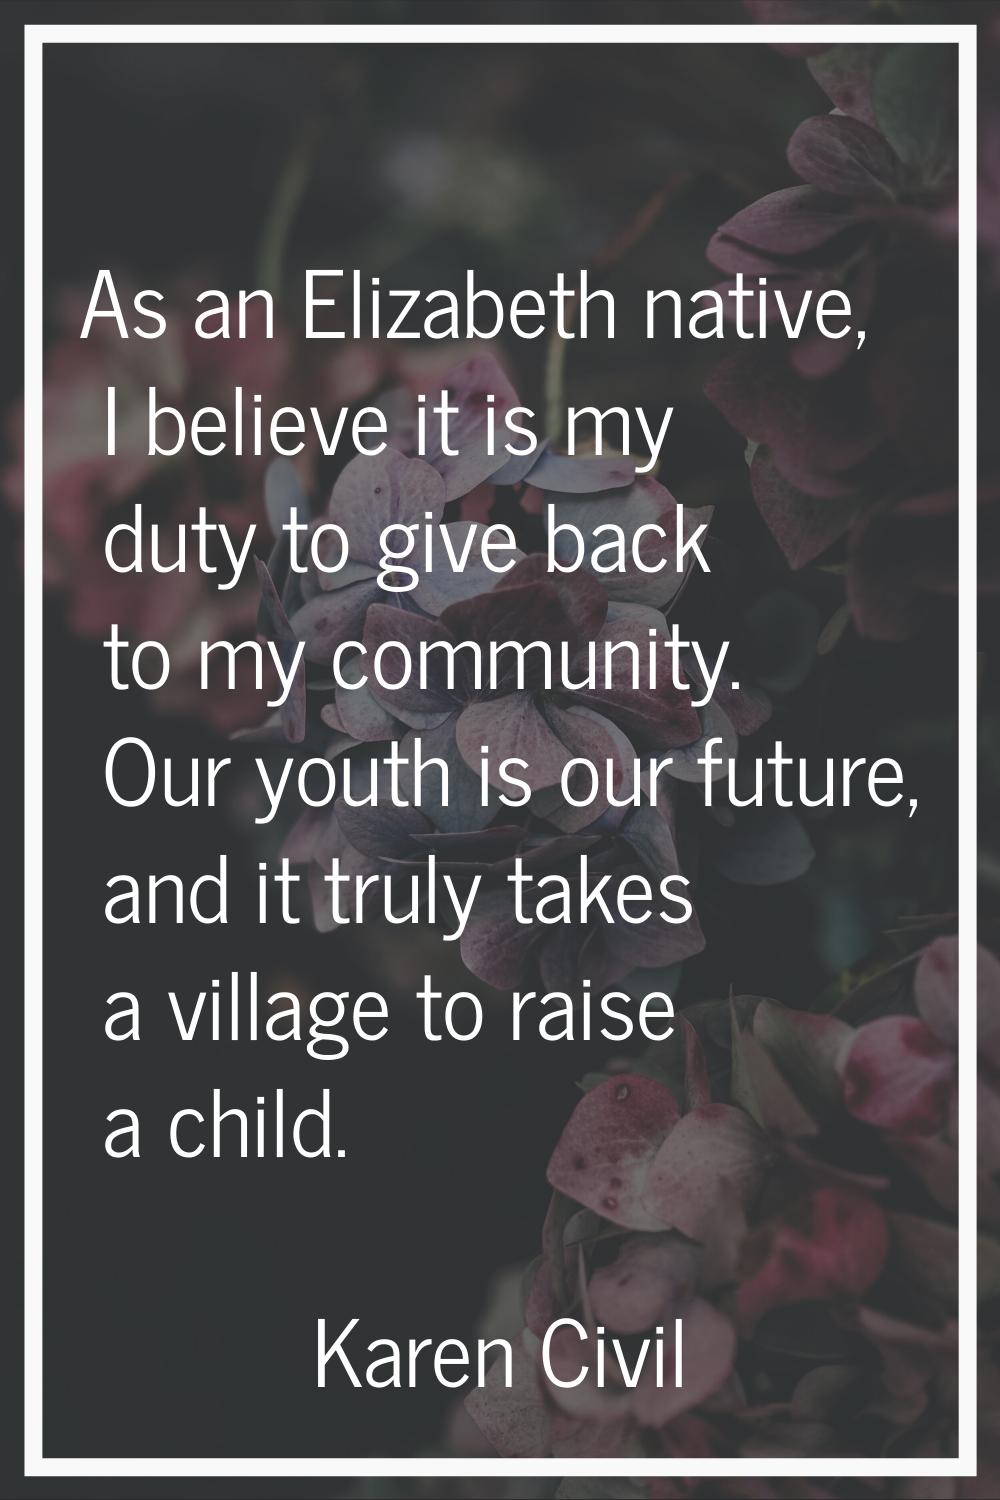 As an Elizabeth native, I believe it is my duty to give back to my community. Our youth is our futu